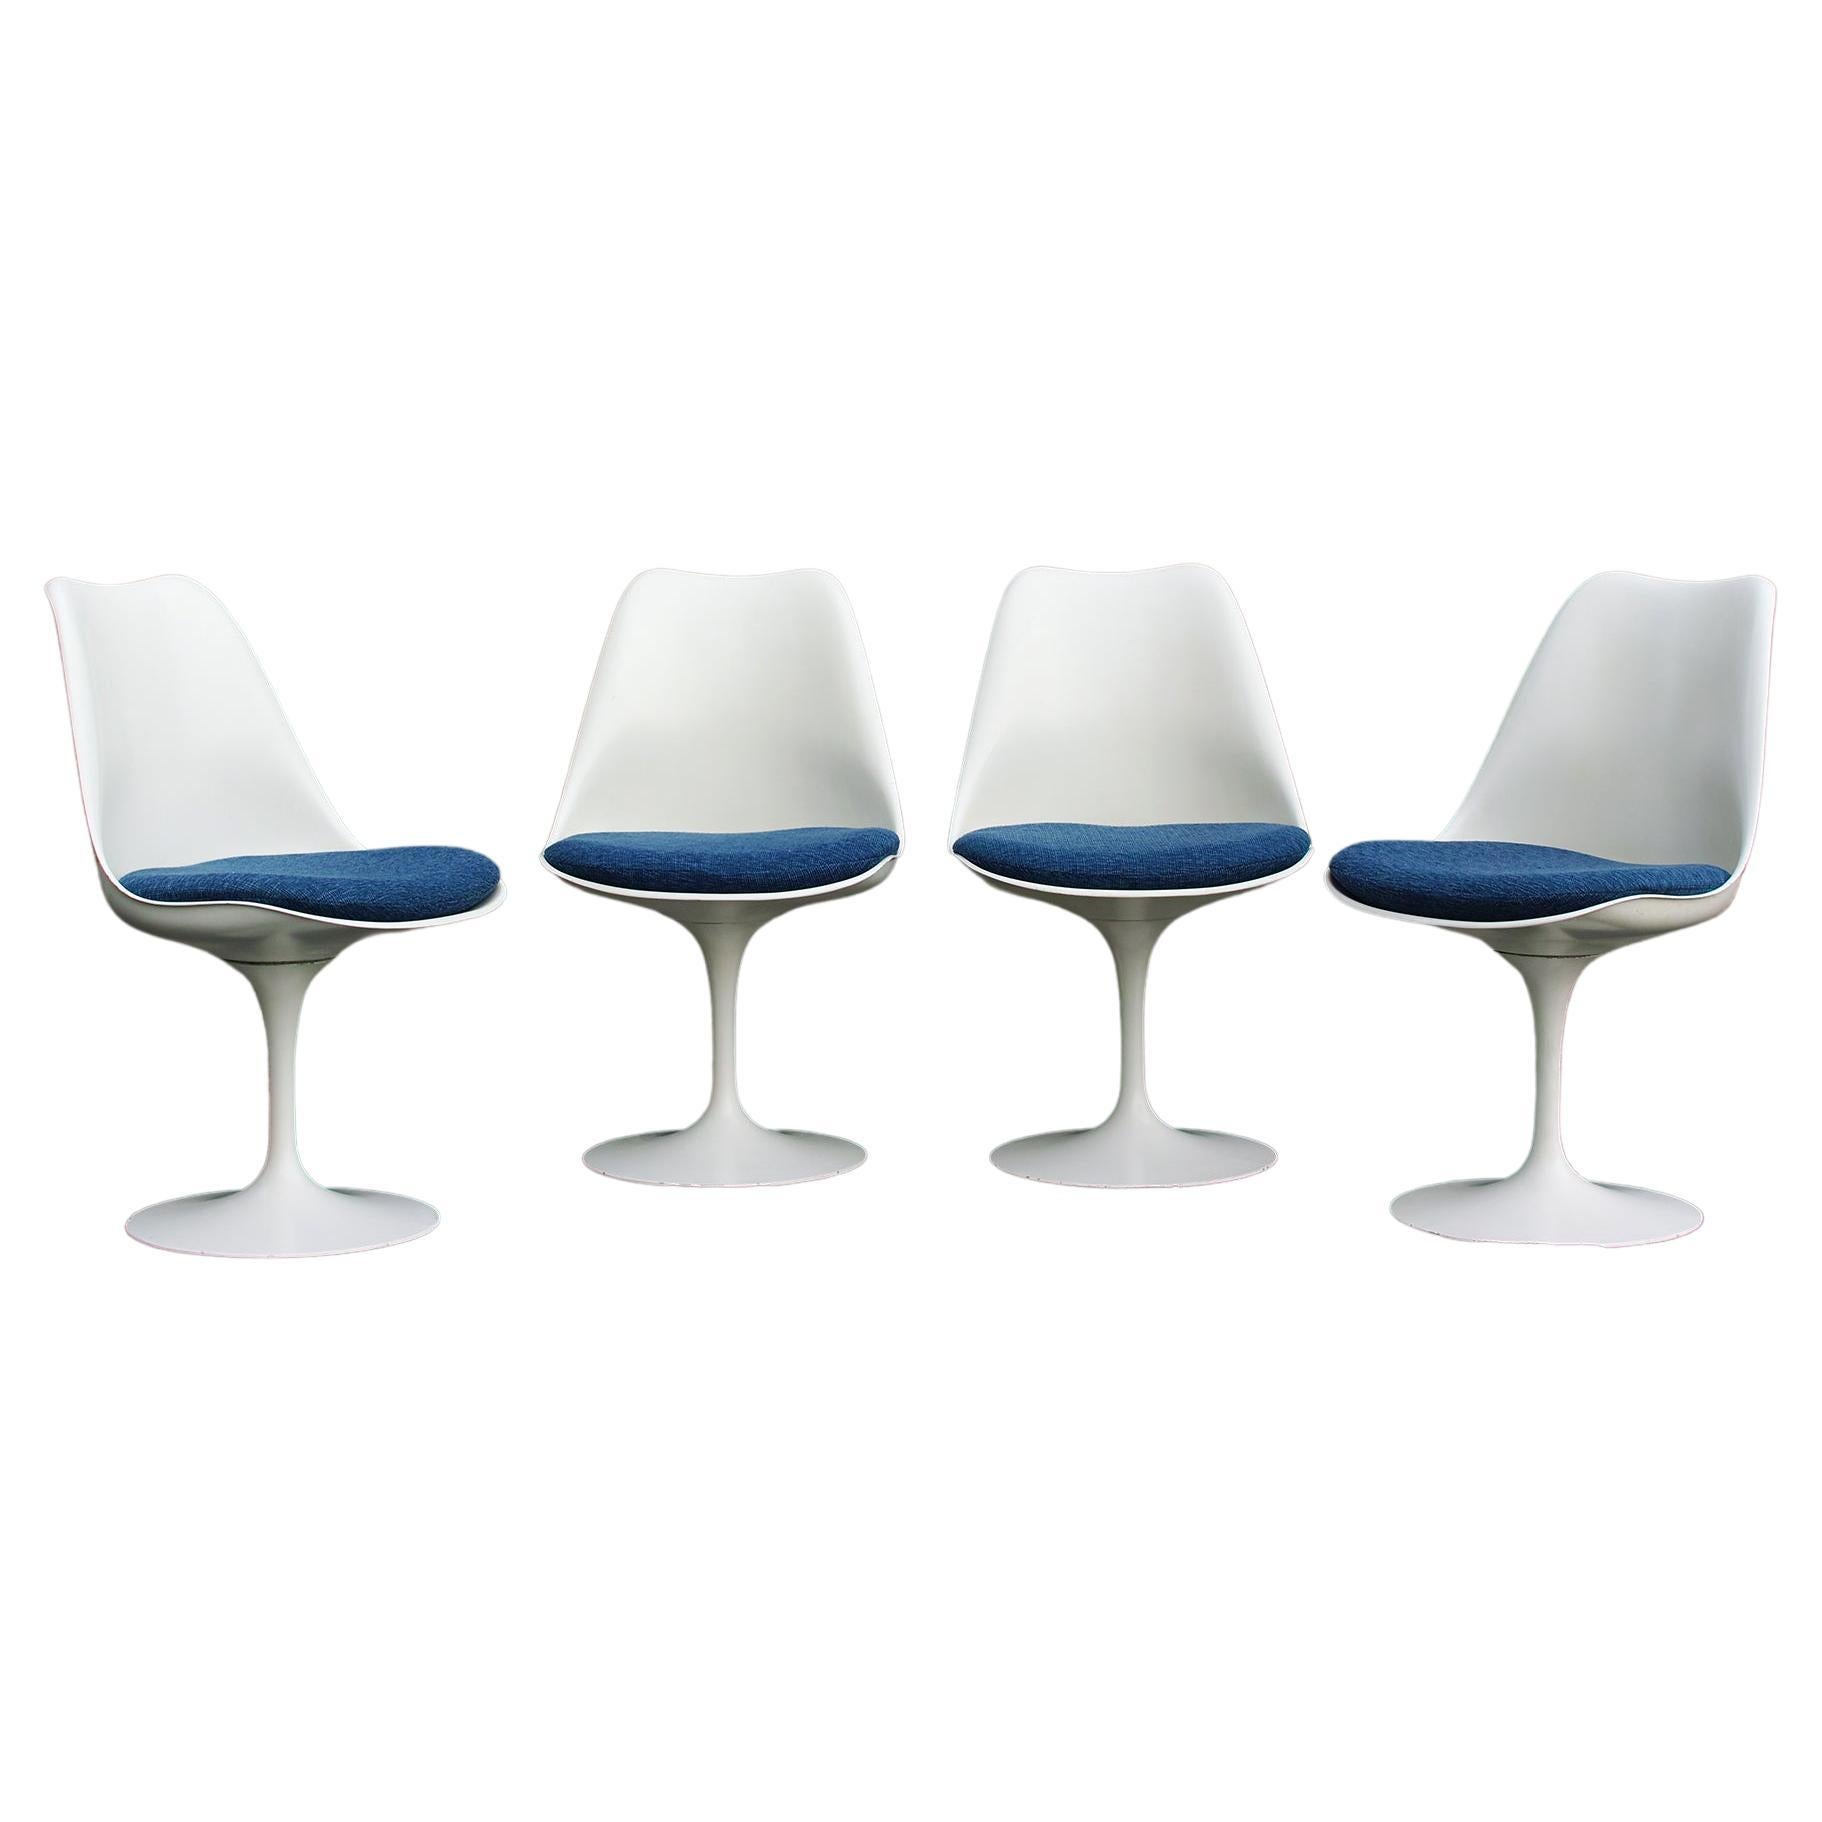 Early Production Saarinen Tulip Dining Chairs